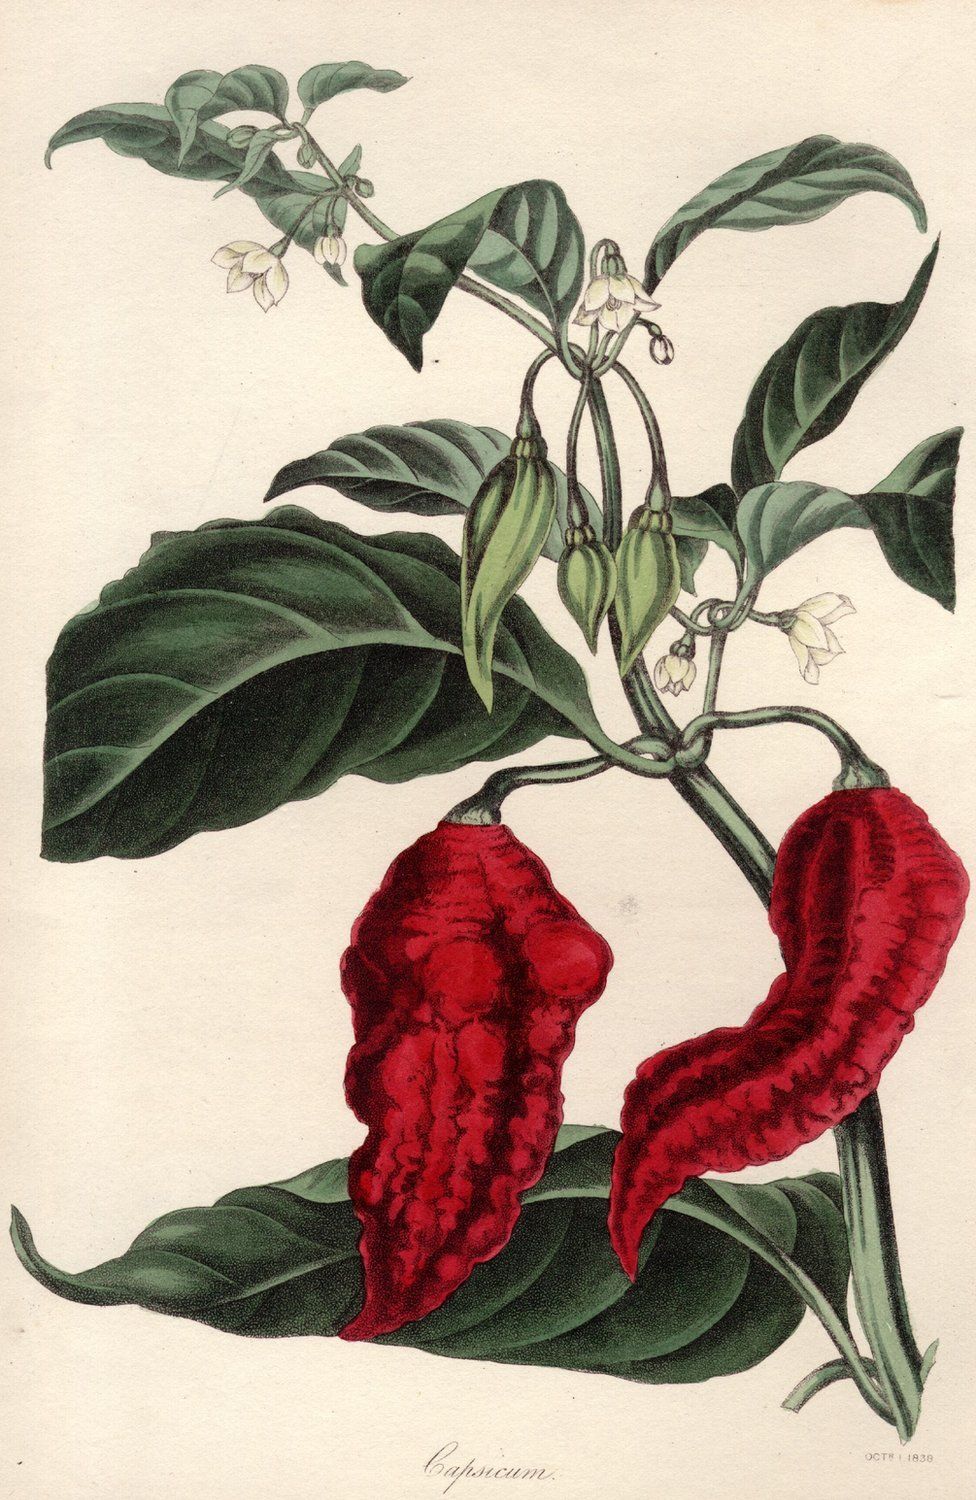 A picture from the 1830s of capsicum ustulatum, a kind of chilli